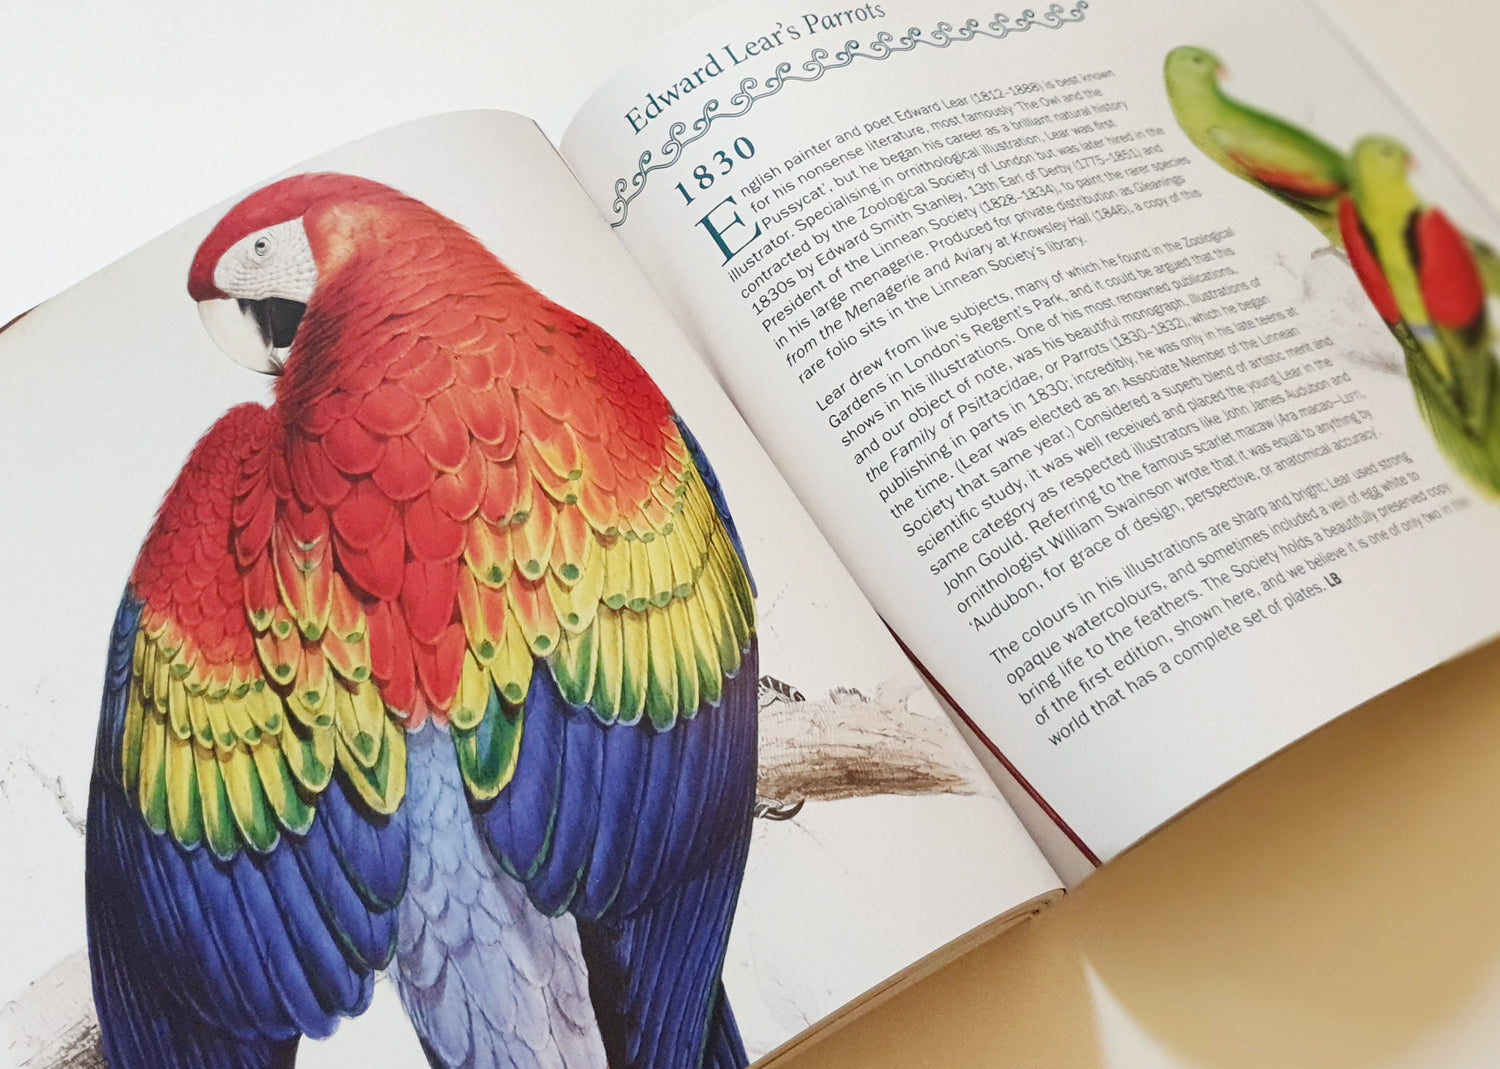 Book page showing Edward Lear's illustrated parrots